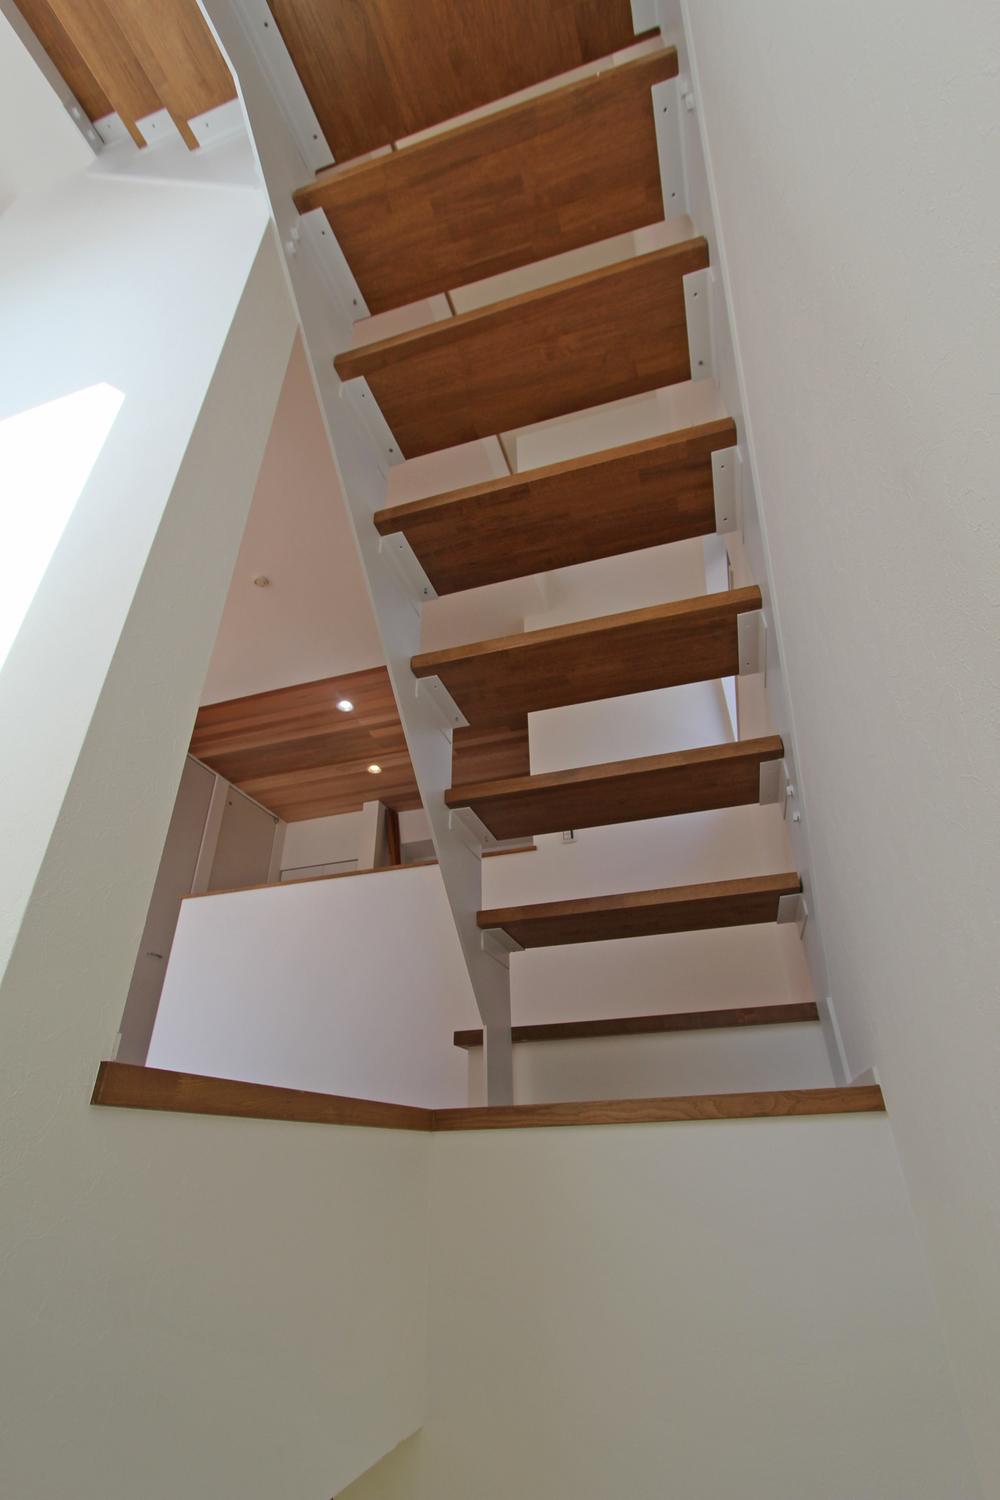 Model house photo. Approach to the loft Skeleton stairs Example of construction